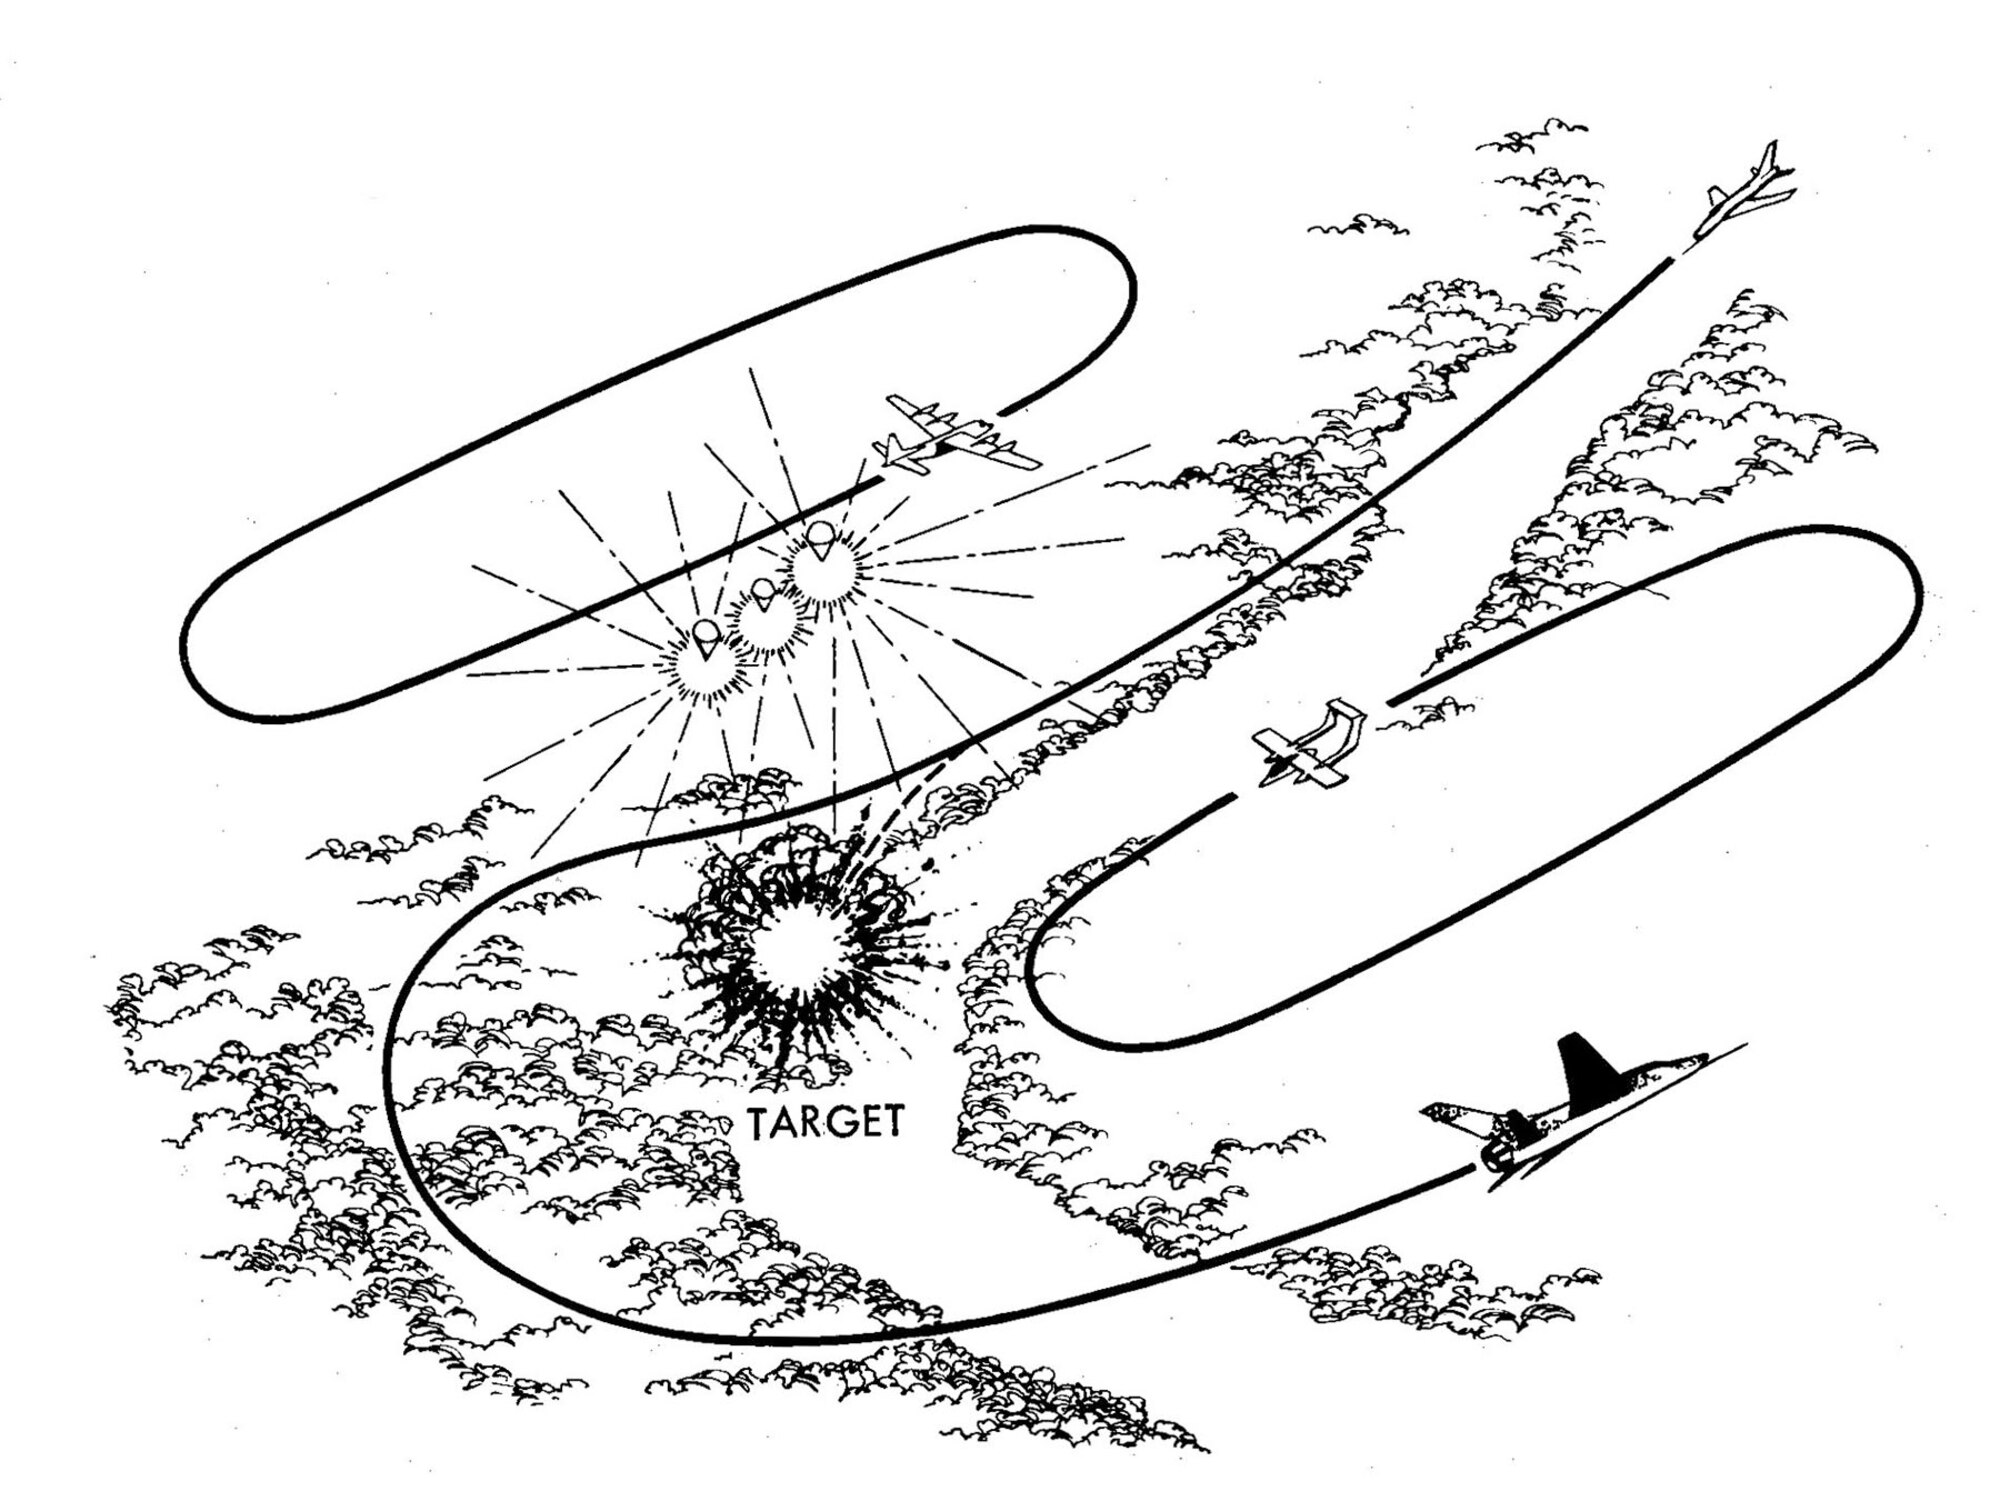 This drawing illustrates how a (1) flareship worked in concert with a (2) forward air controller (FAC) and (3) strike aircraft to provide close air support. By flying patterns to either side of the target, the flareship and FAC avoided each other and the strike aircraft. [Graphic extracted from: Study (U), Lt. Col. Ralph A. Rowley, The Air Force in Southeast Asia: Tactics and Techniques of Close Air Support Operations, 1961-1973 (Washington: Office of Air Force History, Feb 1976)]